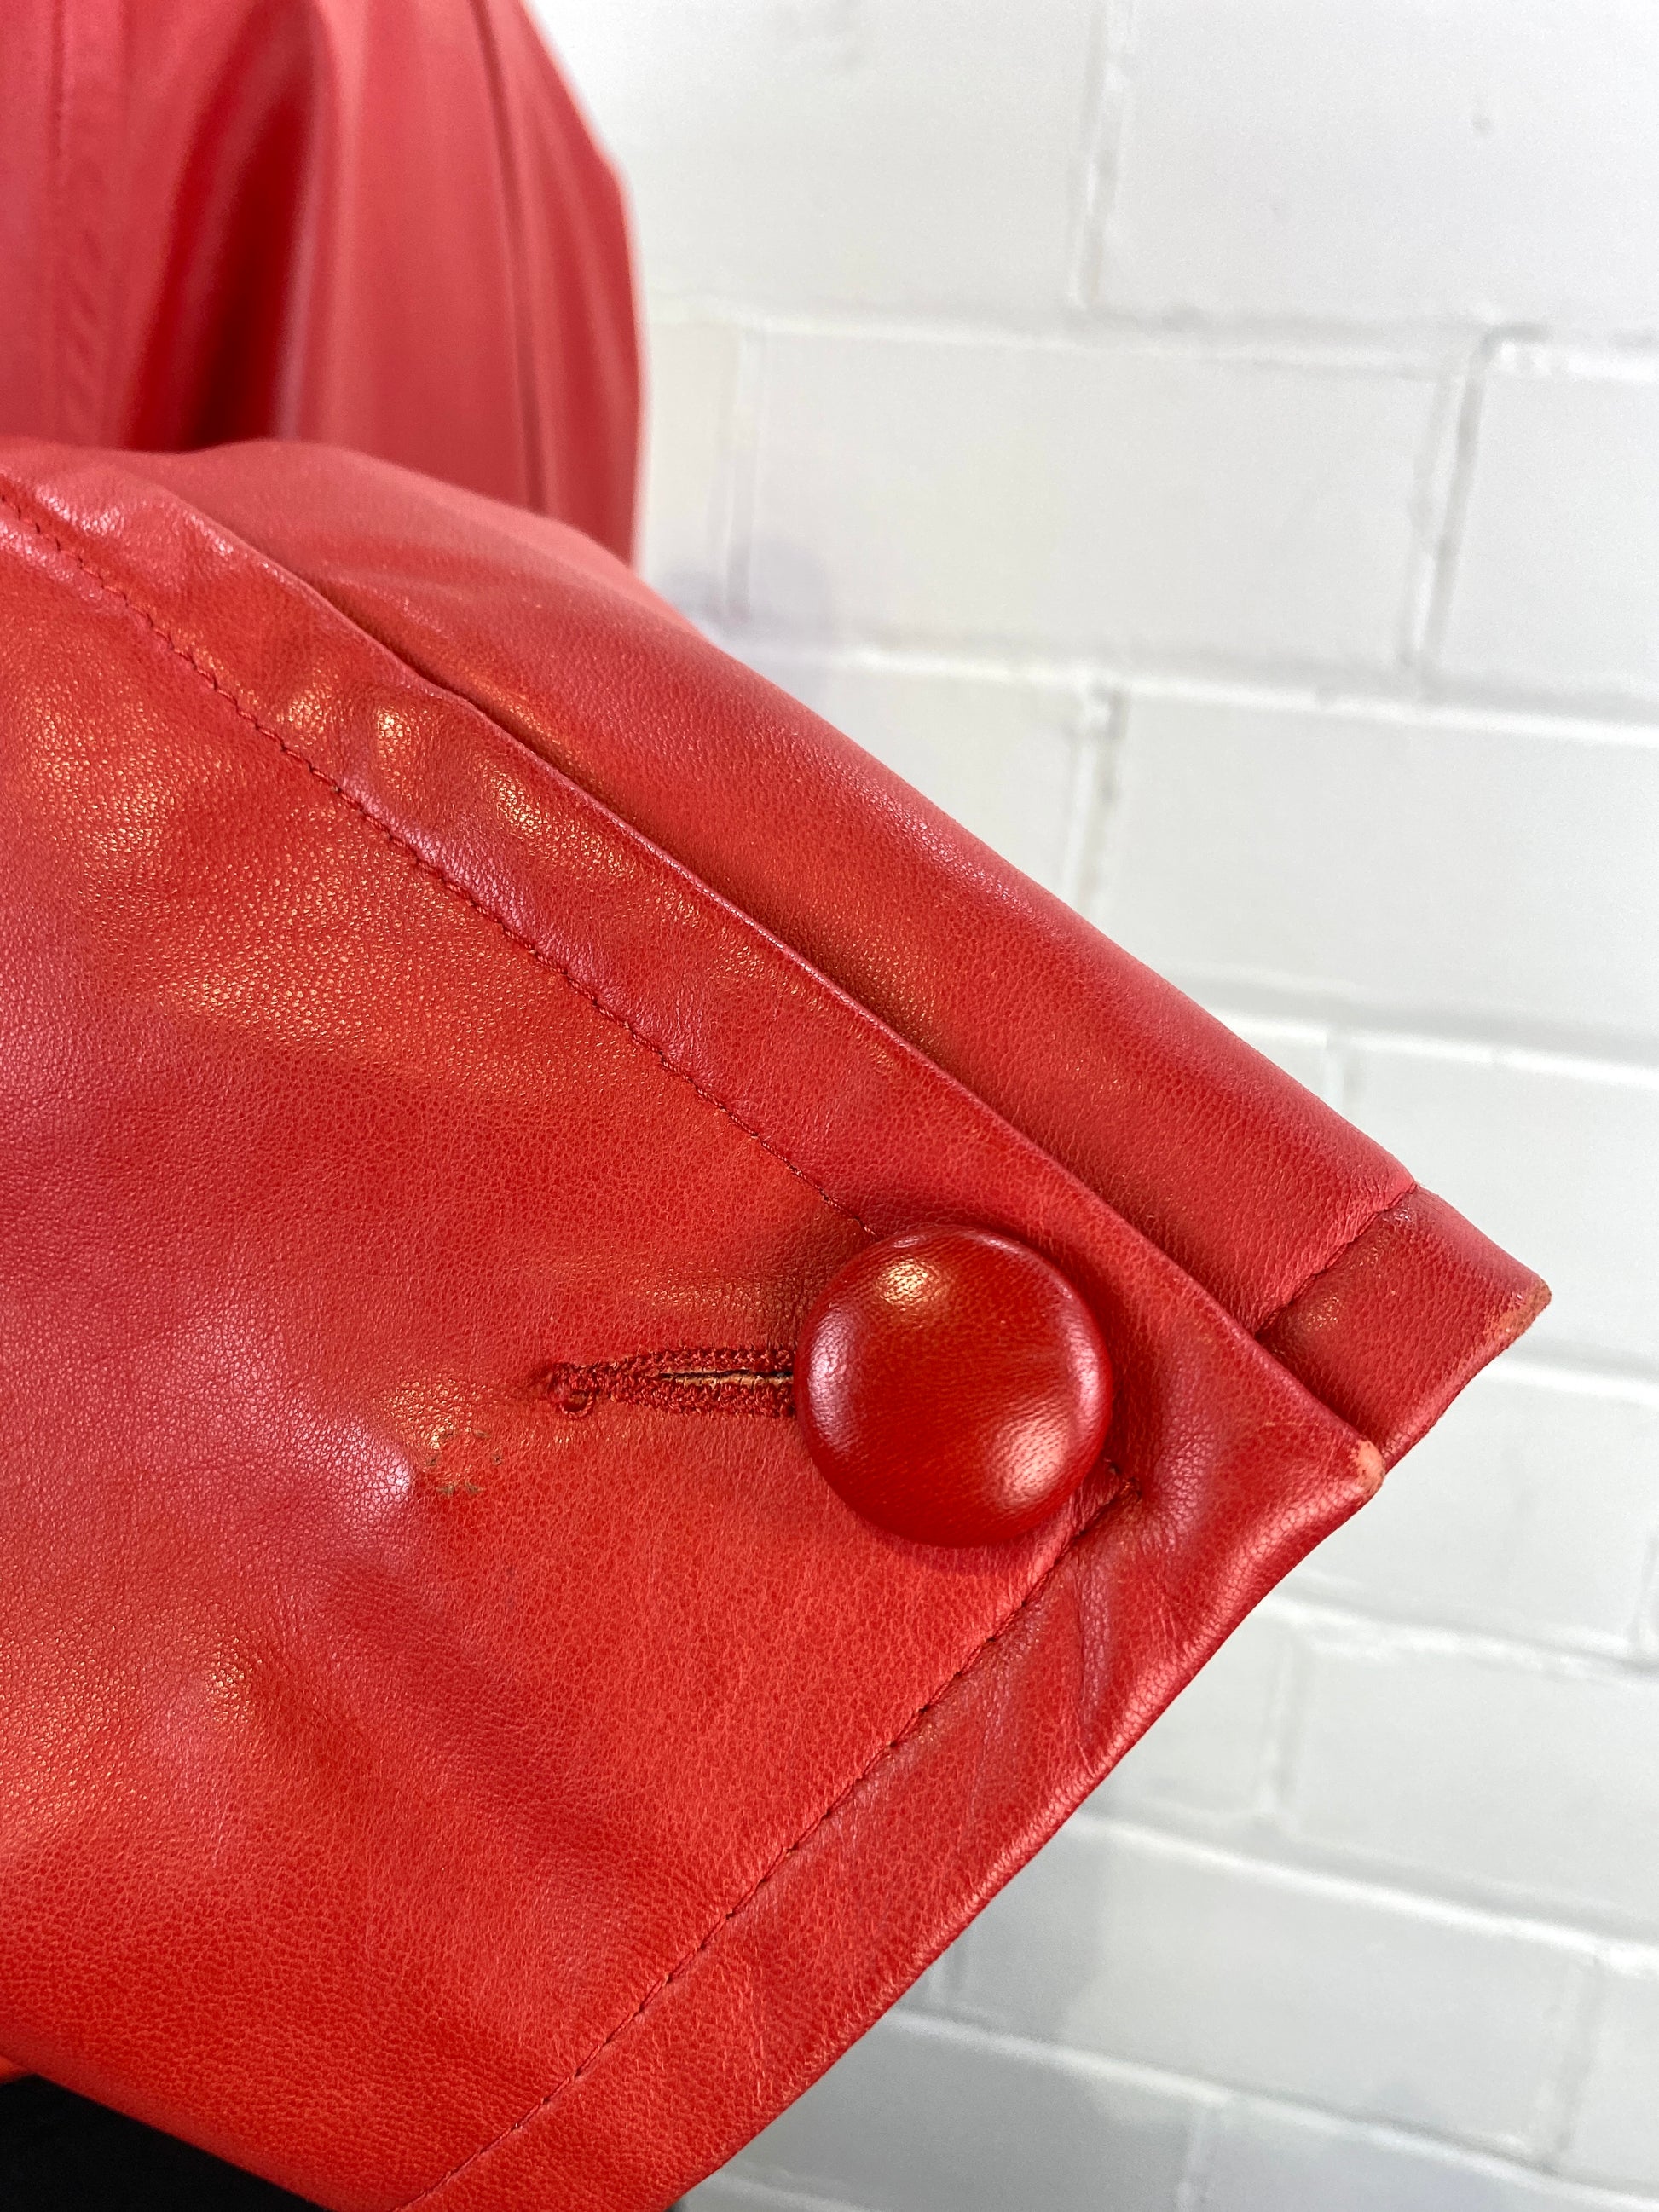 Vintage 1980s Red Leather Cropped Jacket, Large